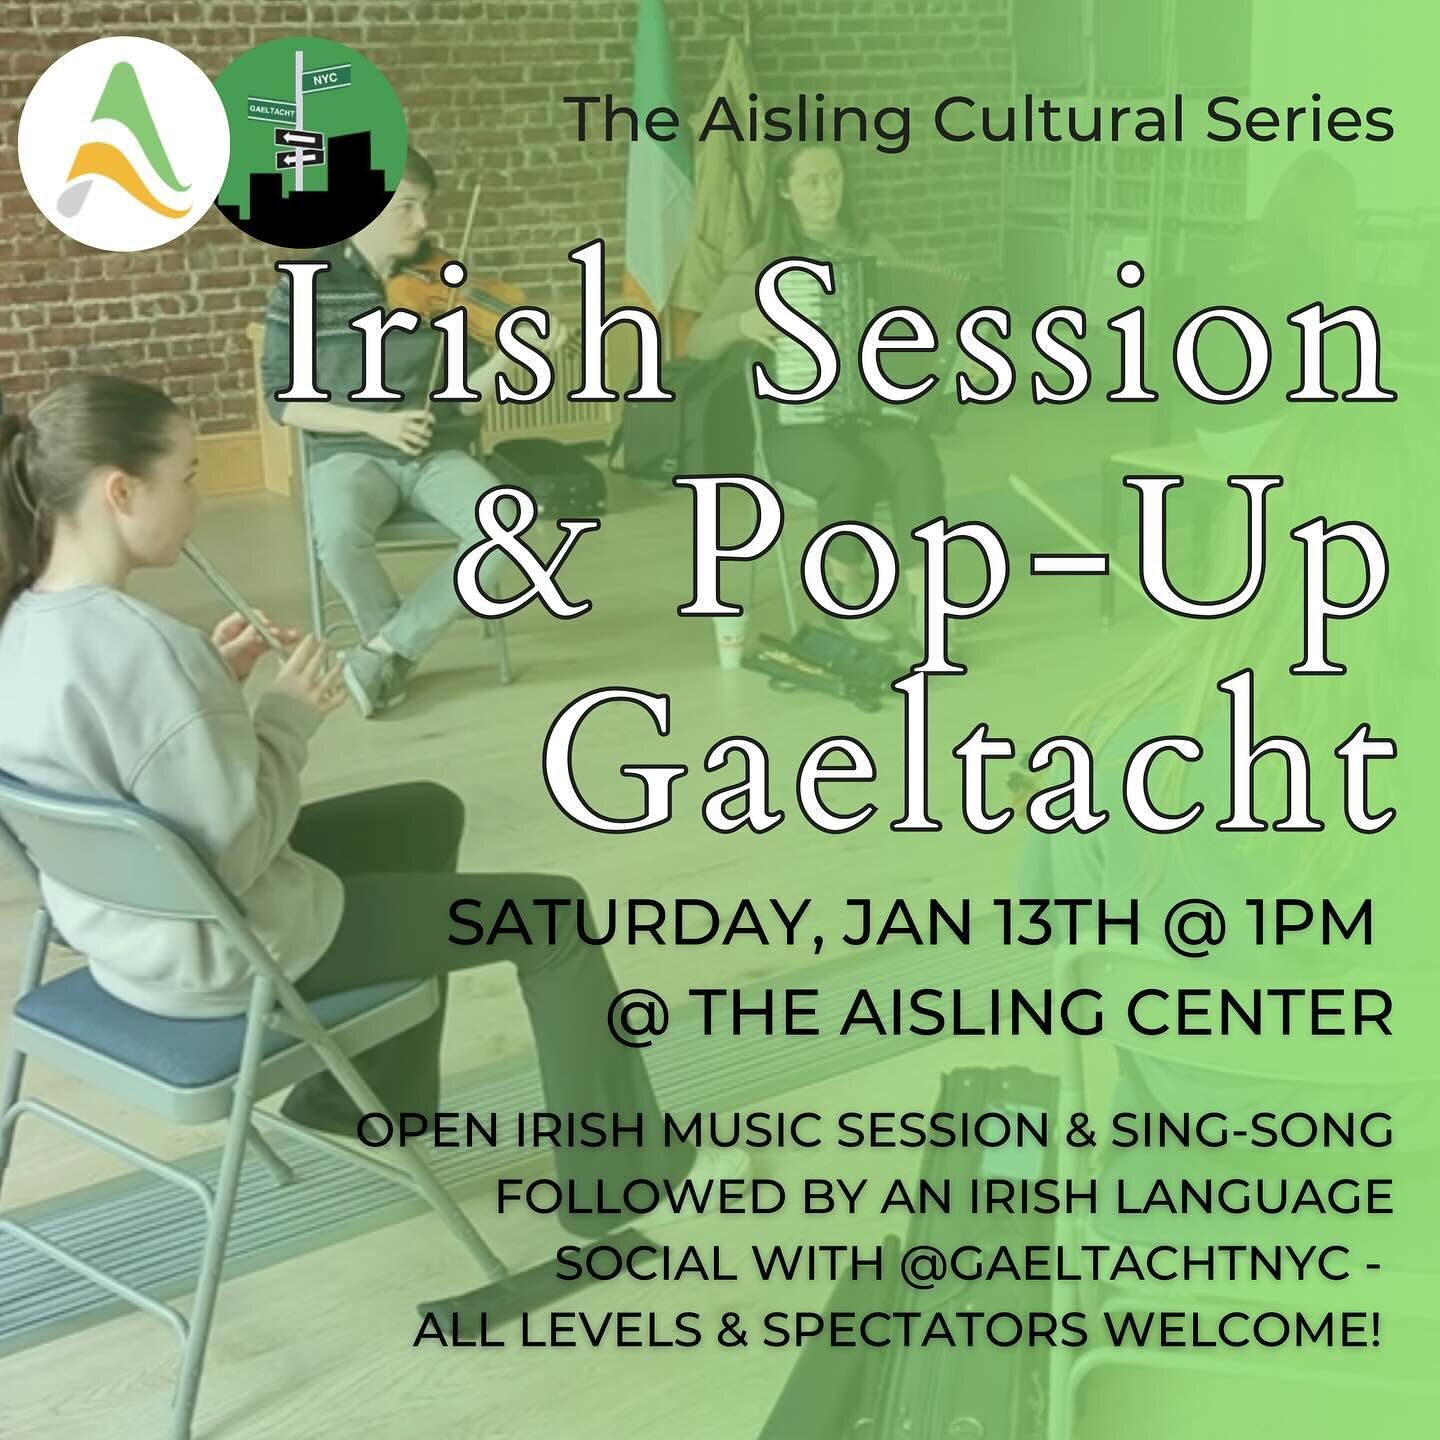 🥂Athbhliain Faoi Mhaise Daoibh ☘️

Is your New Year&rsquo;s Resolution to spend more time speaking as Gaeilge? We&rsquo;ve got you covered! 

To kick off the New Year, GAELTACHT NYC will be co-hosting a Seisi&uacute;n and Pop-Up Gaeltacht with the A